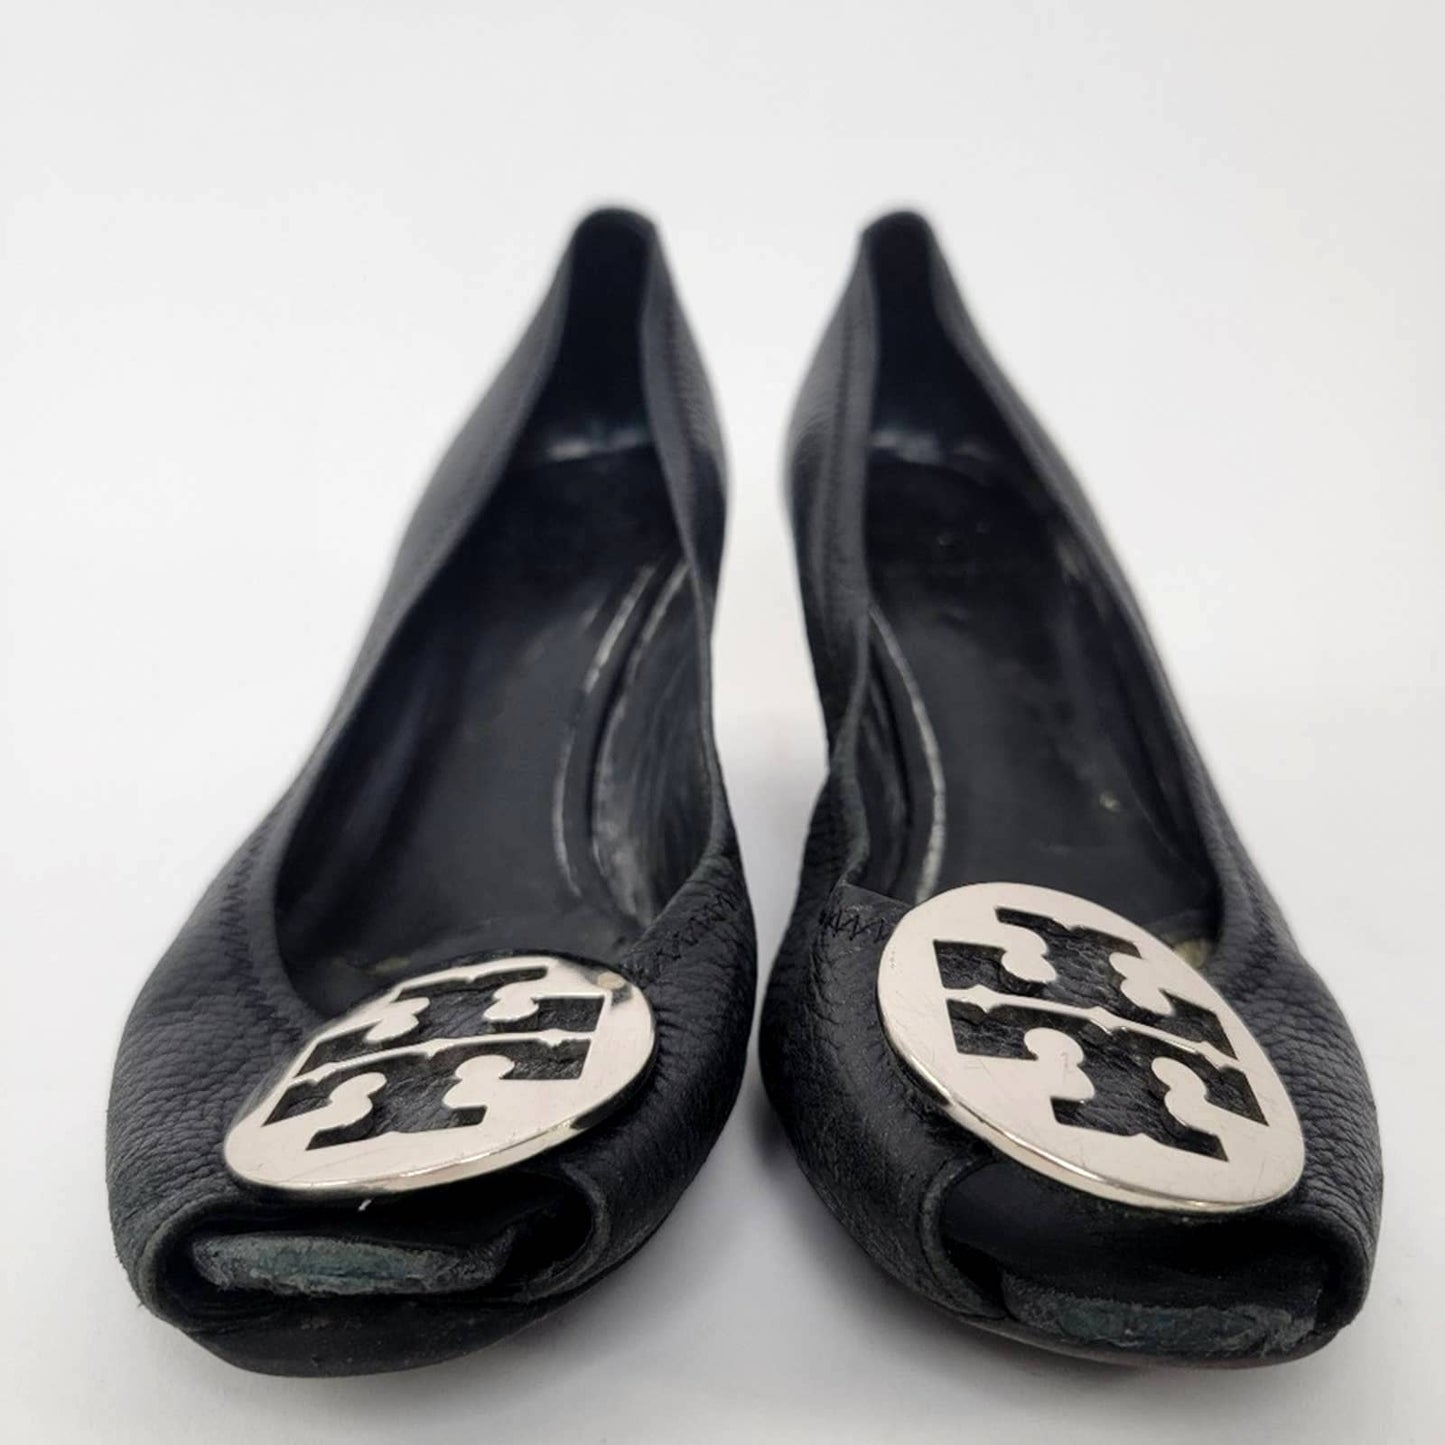 Tory Burch Sally 2 Leather Wedge Pump - Black/Silver